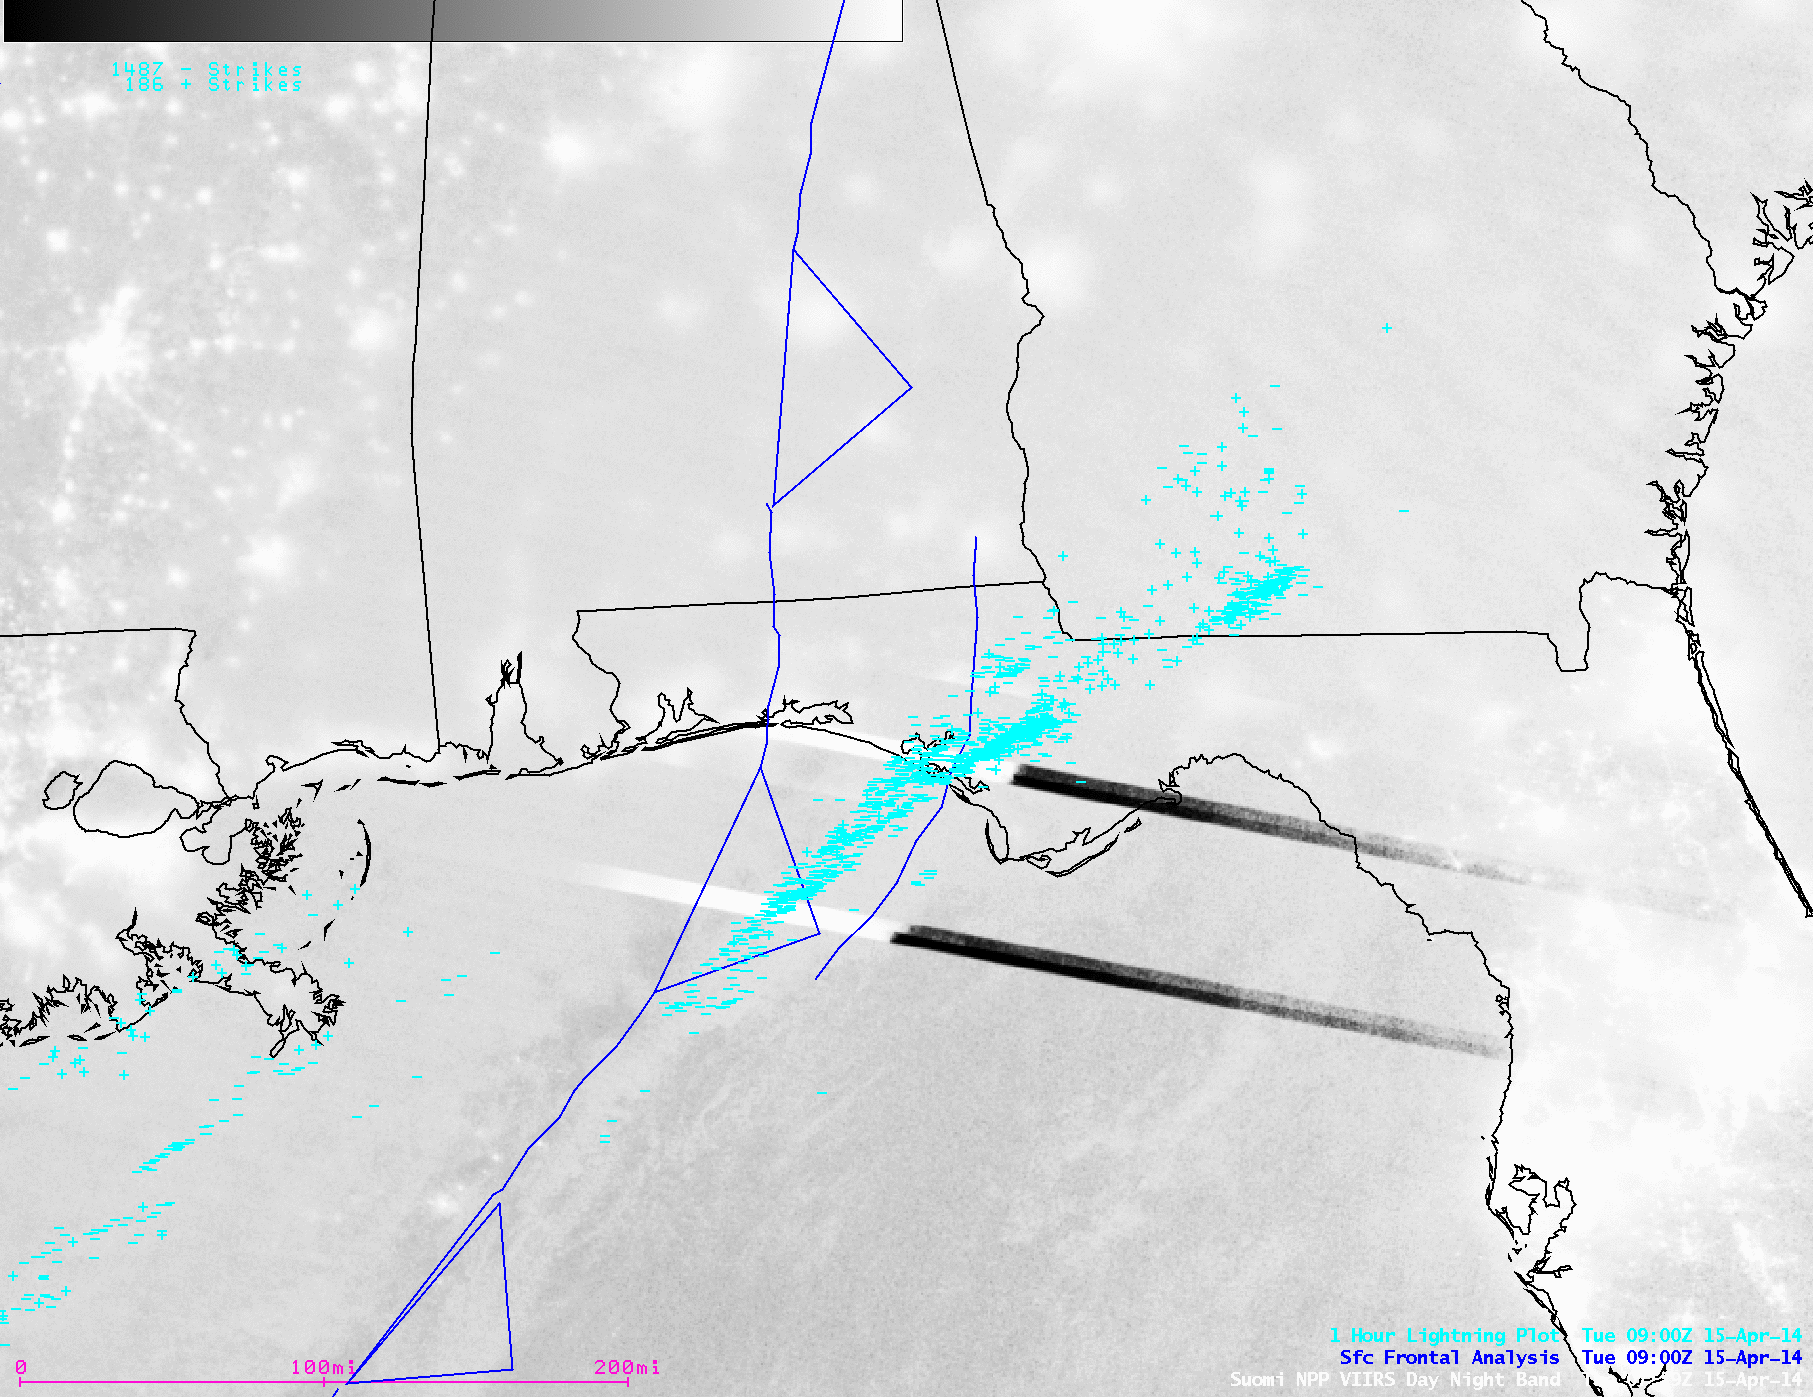 Suomi NPP VIIRS 0.7 Âµm Day/Night Band and 11.45 Âµm IR channel images, with surface frontal analysis and 1-hour cloud-to-ground lightning strikes